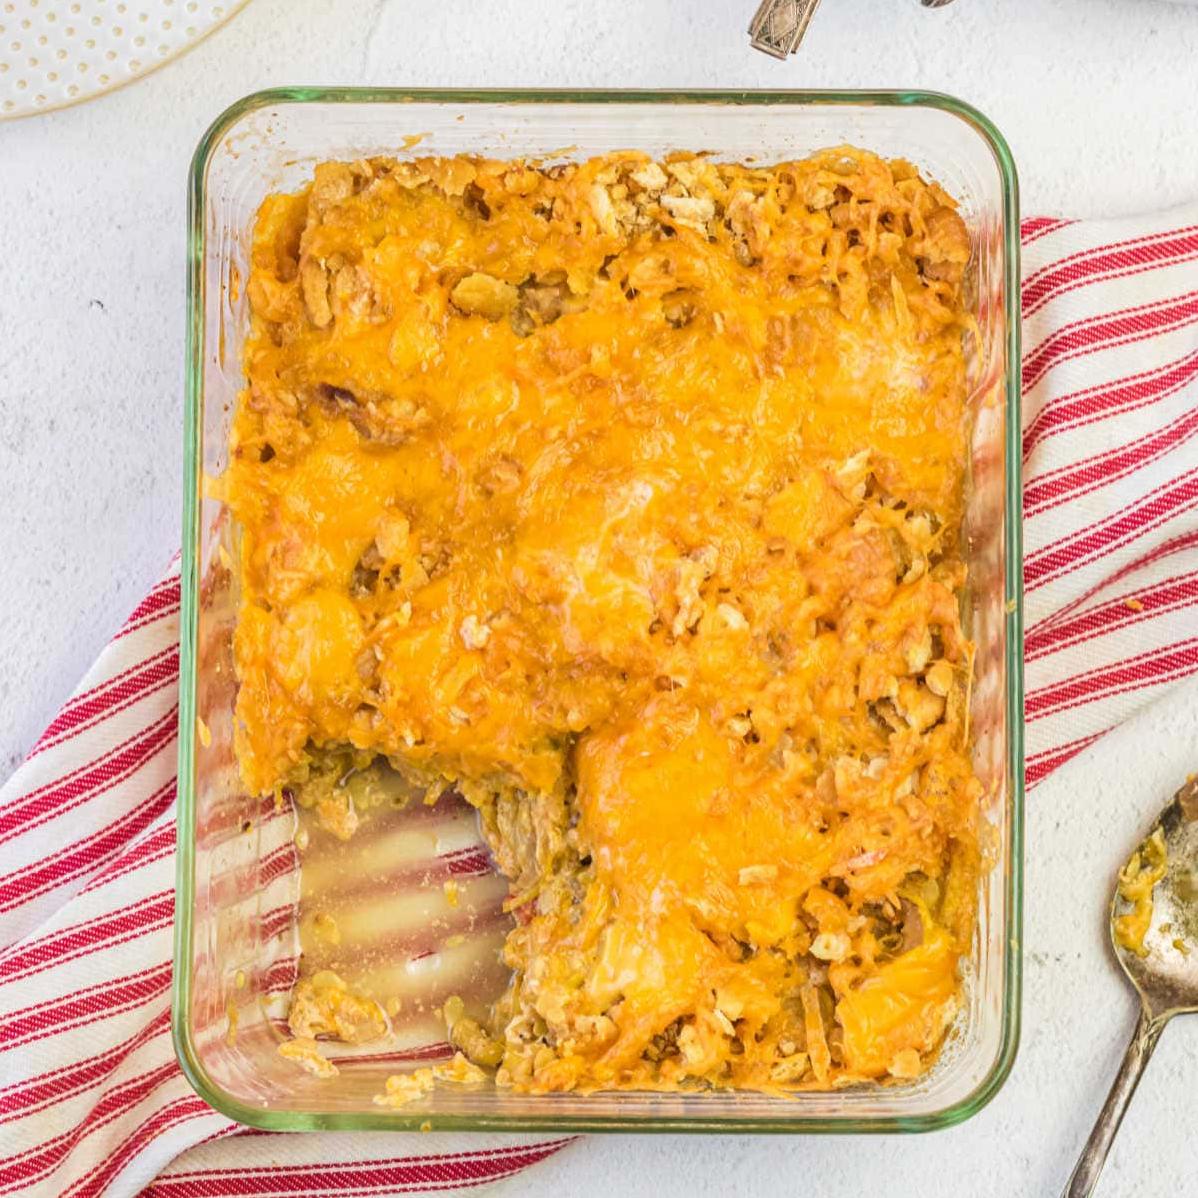  Satisfy your comfort food cravings with this easy-to-make casserole.